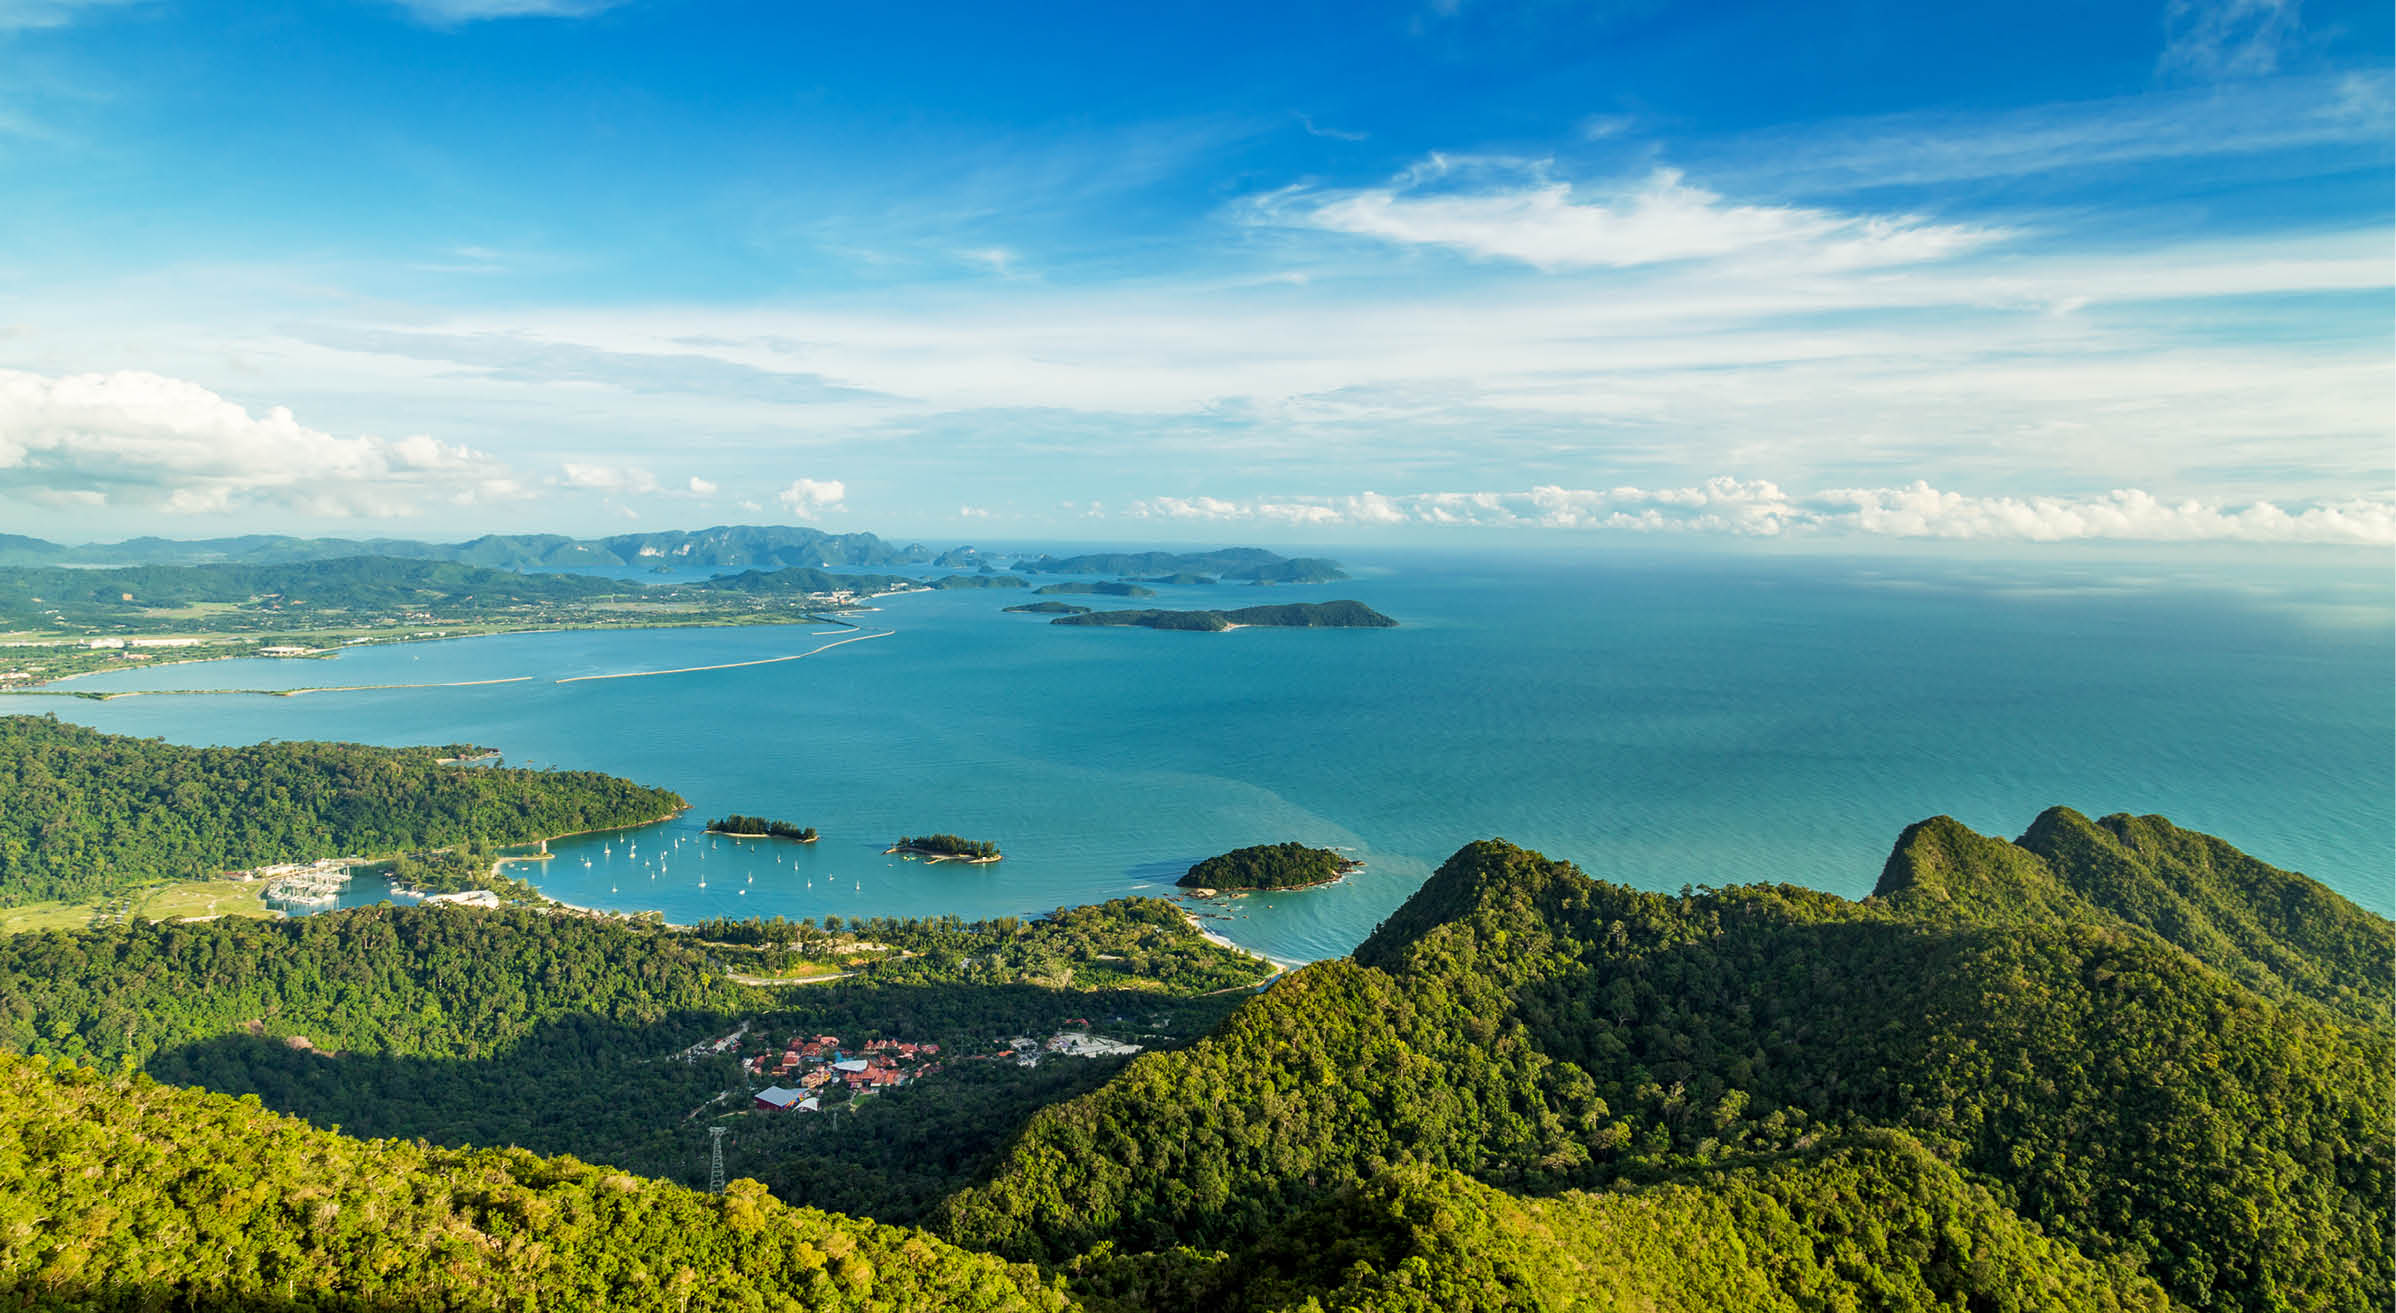 View of tropical island Langkawi in Malaysia, covered with tropical forests. Aerial view on the bay, marina and archipelago of smaller islands in Andaman sea.